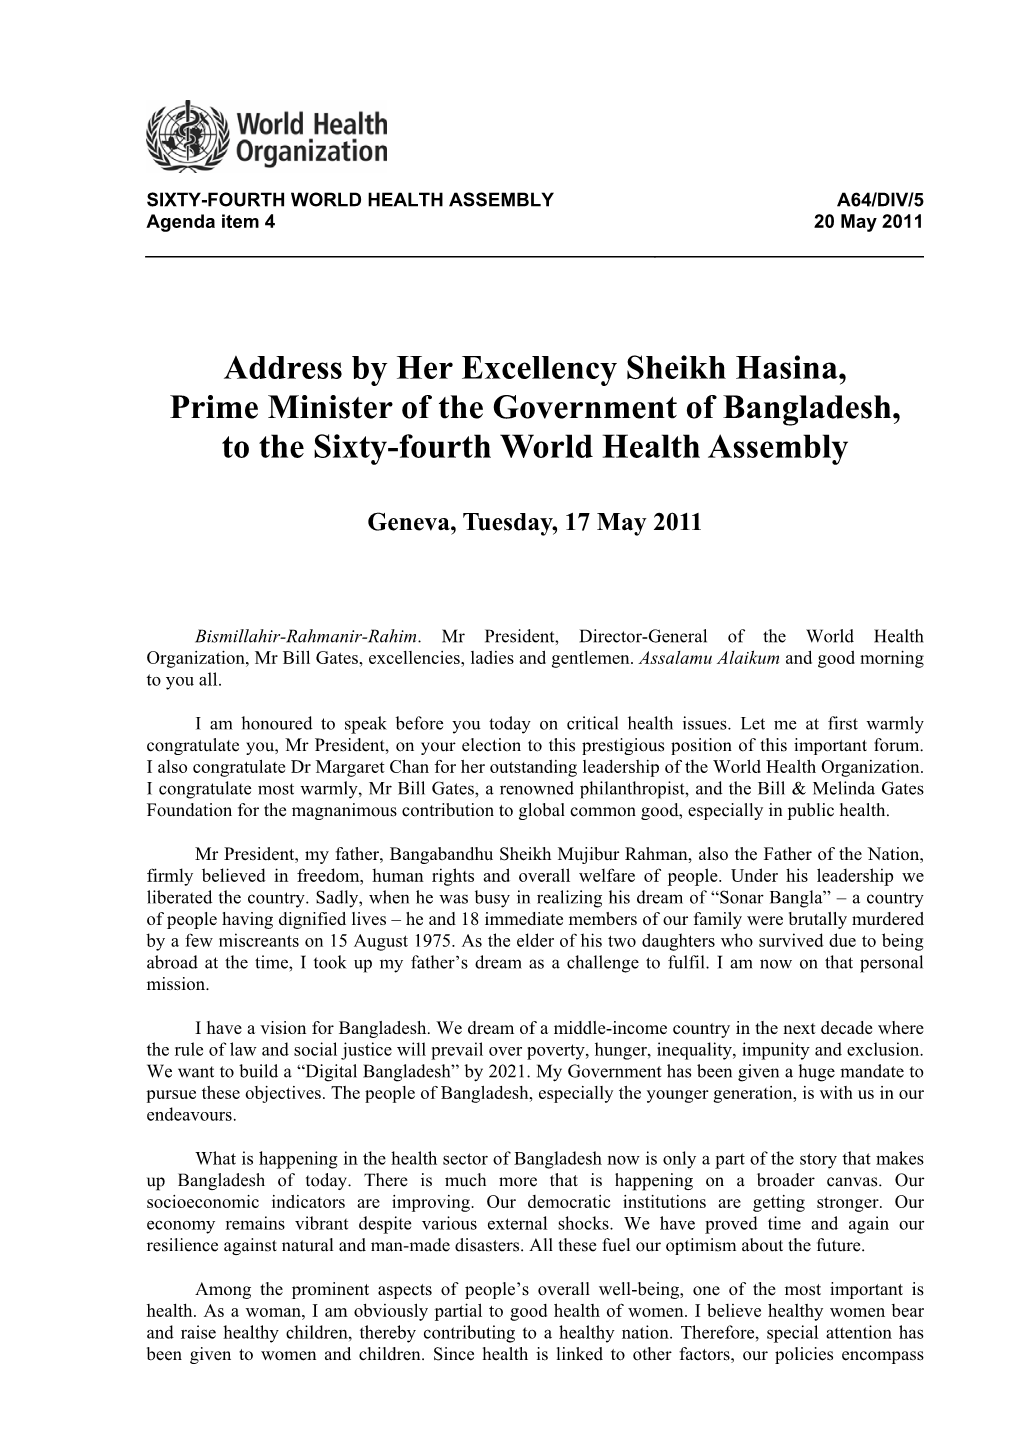 Address by Her Excellency Sheikh Hasina, Prime Minister of the Government of Bangladesh, to the Sixty-Fourth World Health Assembly